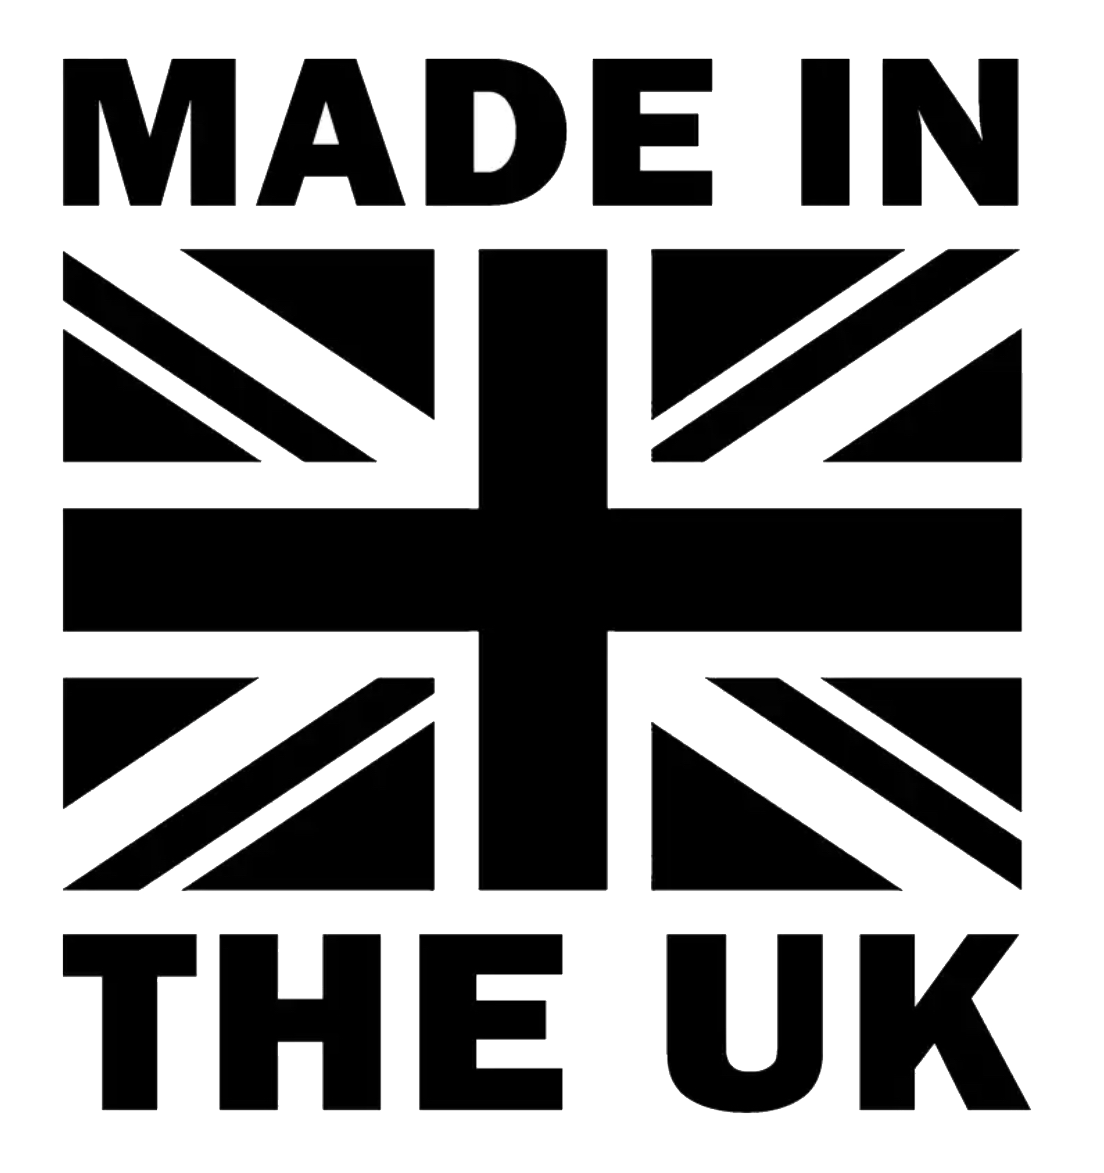 Made in the uk, supporting british makers and designers